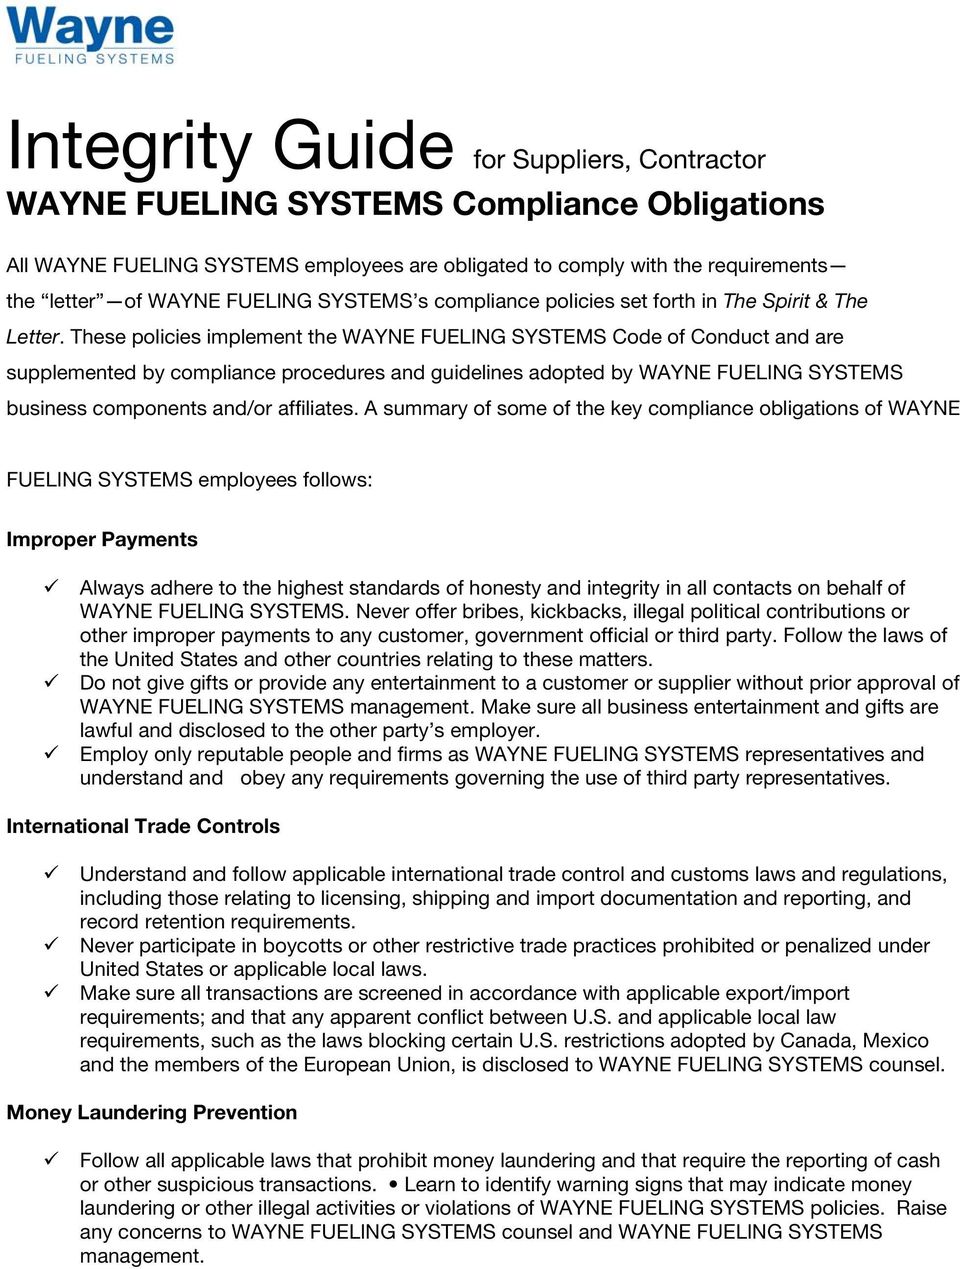 These policies implement the WAYNE FUELING SYSTEMS Code of Conduct and are supplemented by compliance procedures and guidelines adopted by WAYNE FUELING SYSTEMS business components and/or affiliates.